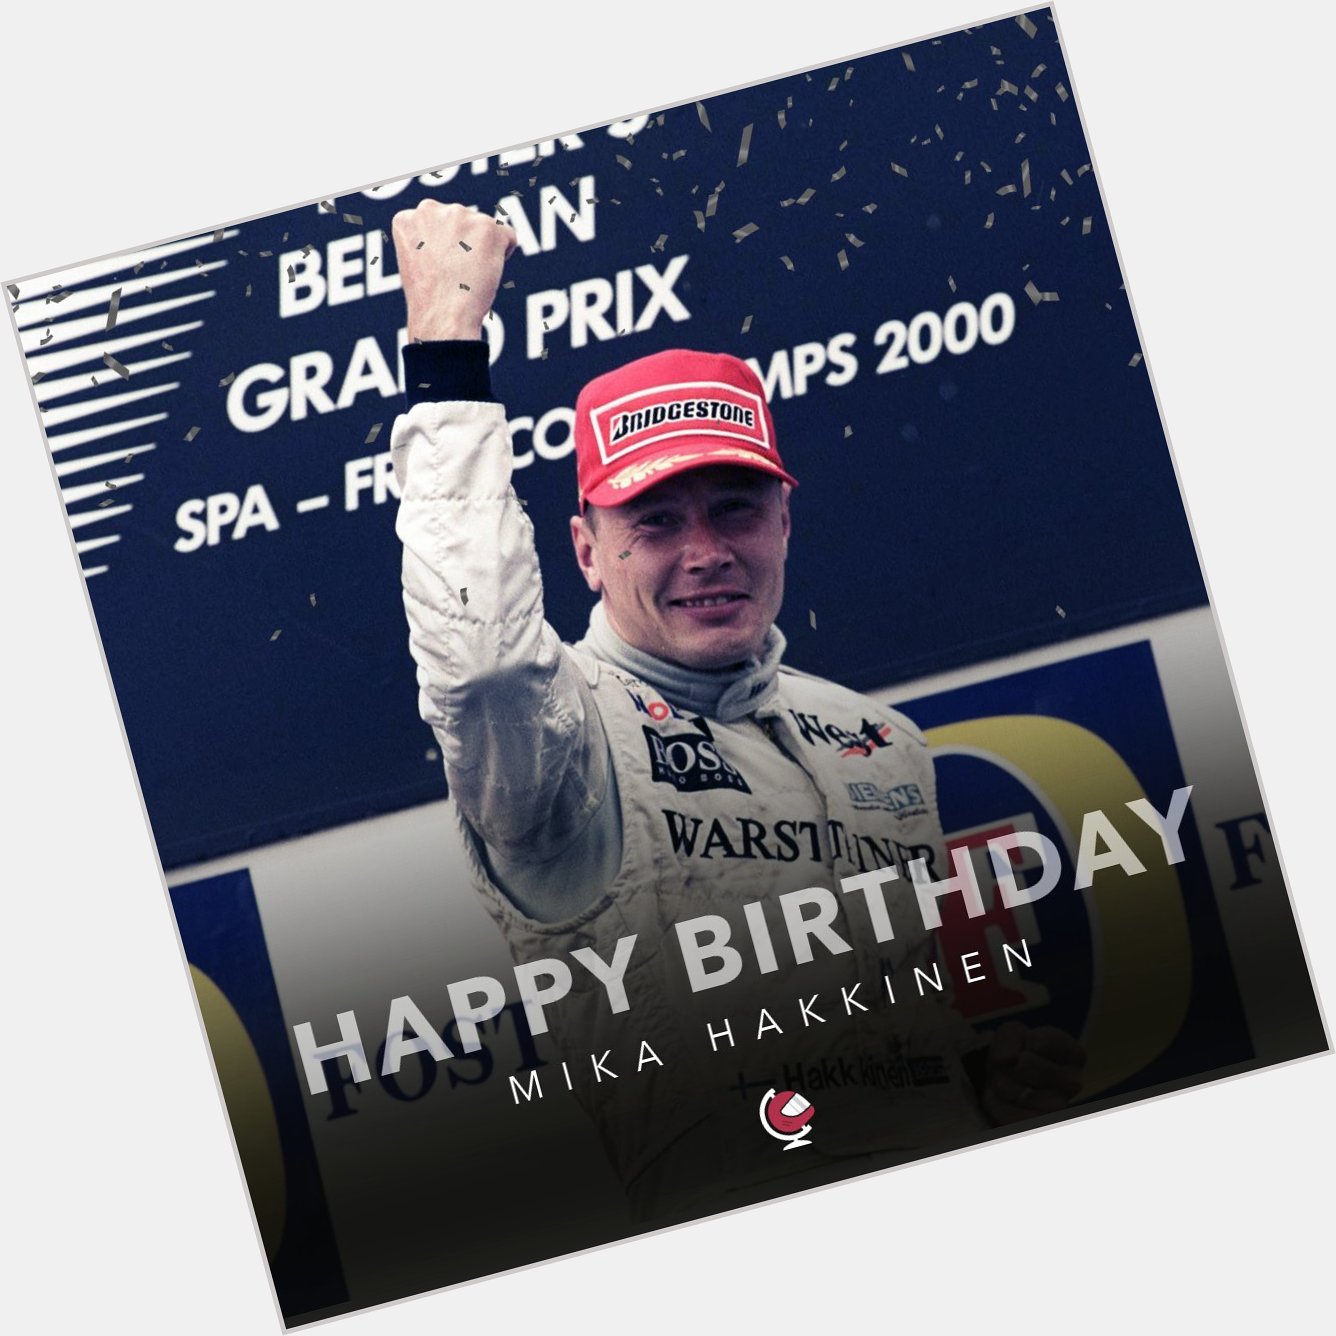 A very Happy Birthday to the two-time World Champion, Mika Hakkinen! 

\The Flying Finn\ is 52 today. 